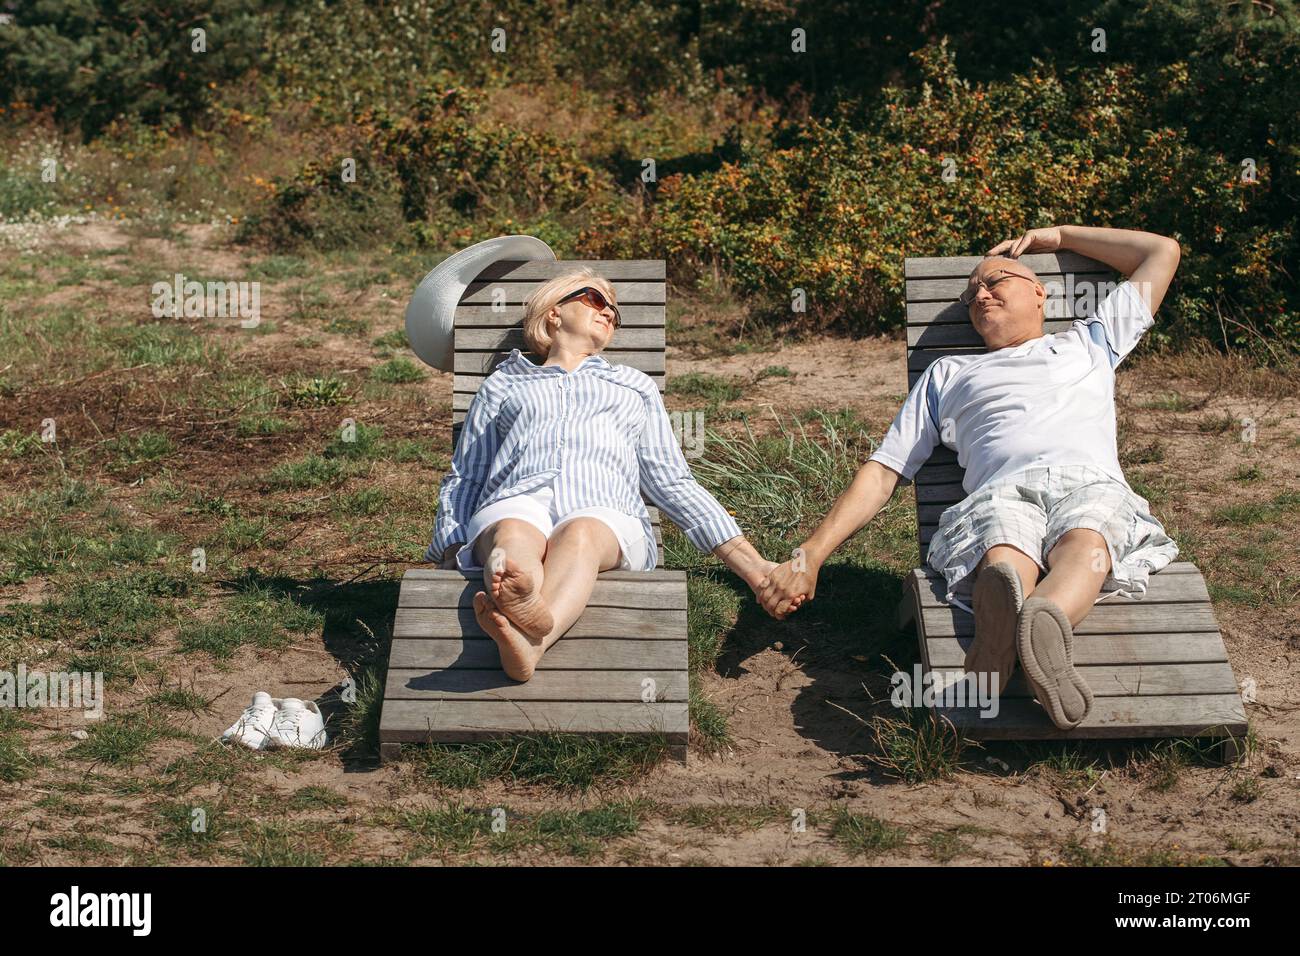 A couple of cute elderly people lie on sunbeds holding hands, basking in the sun. Stock Photo